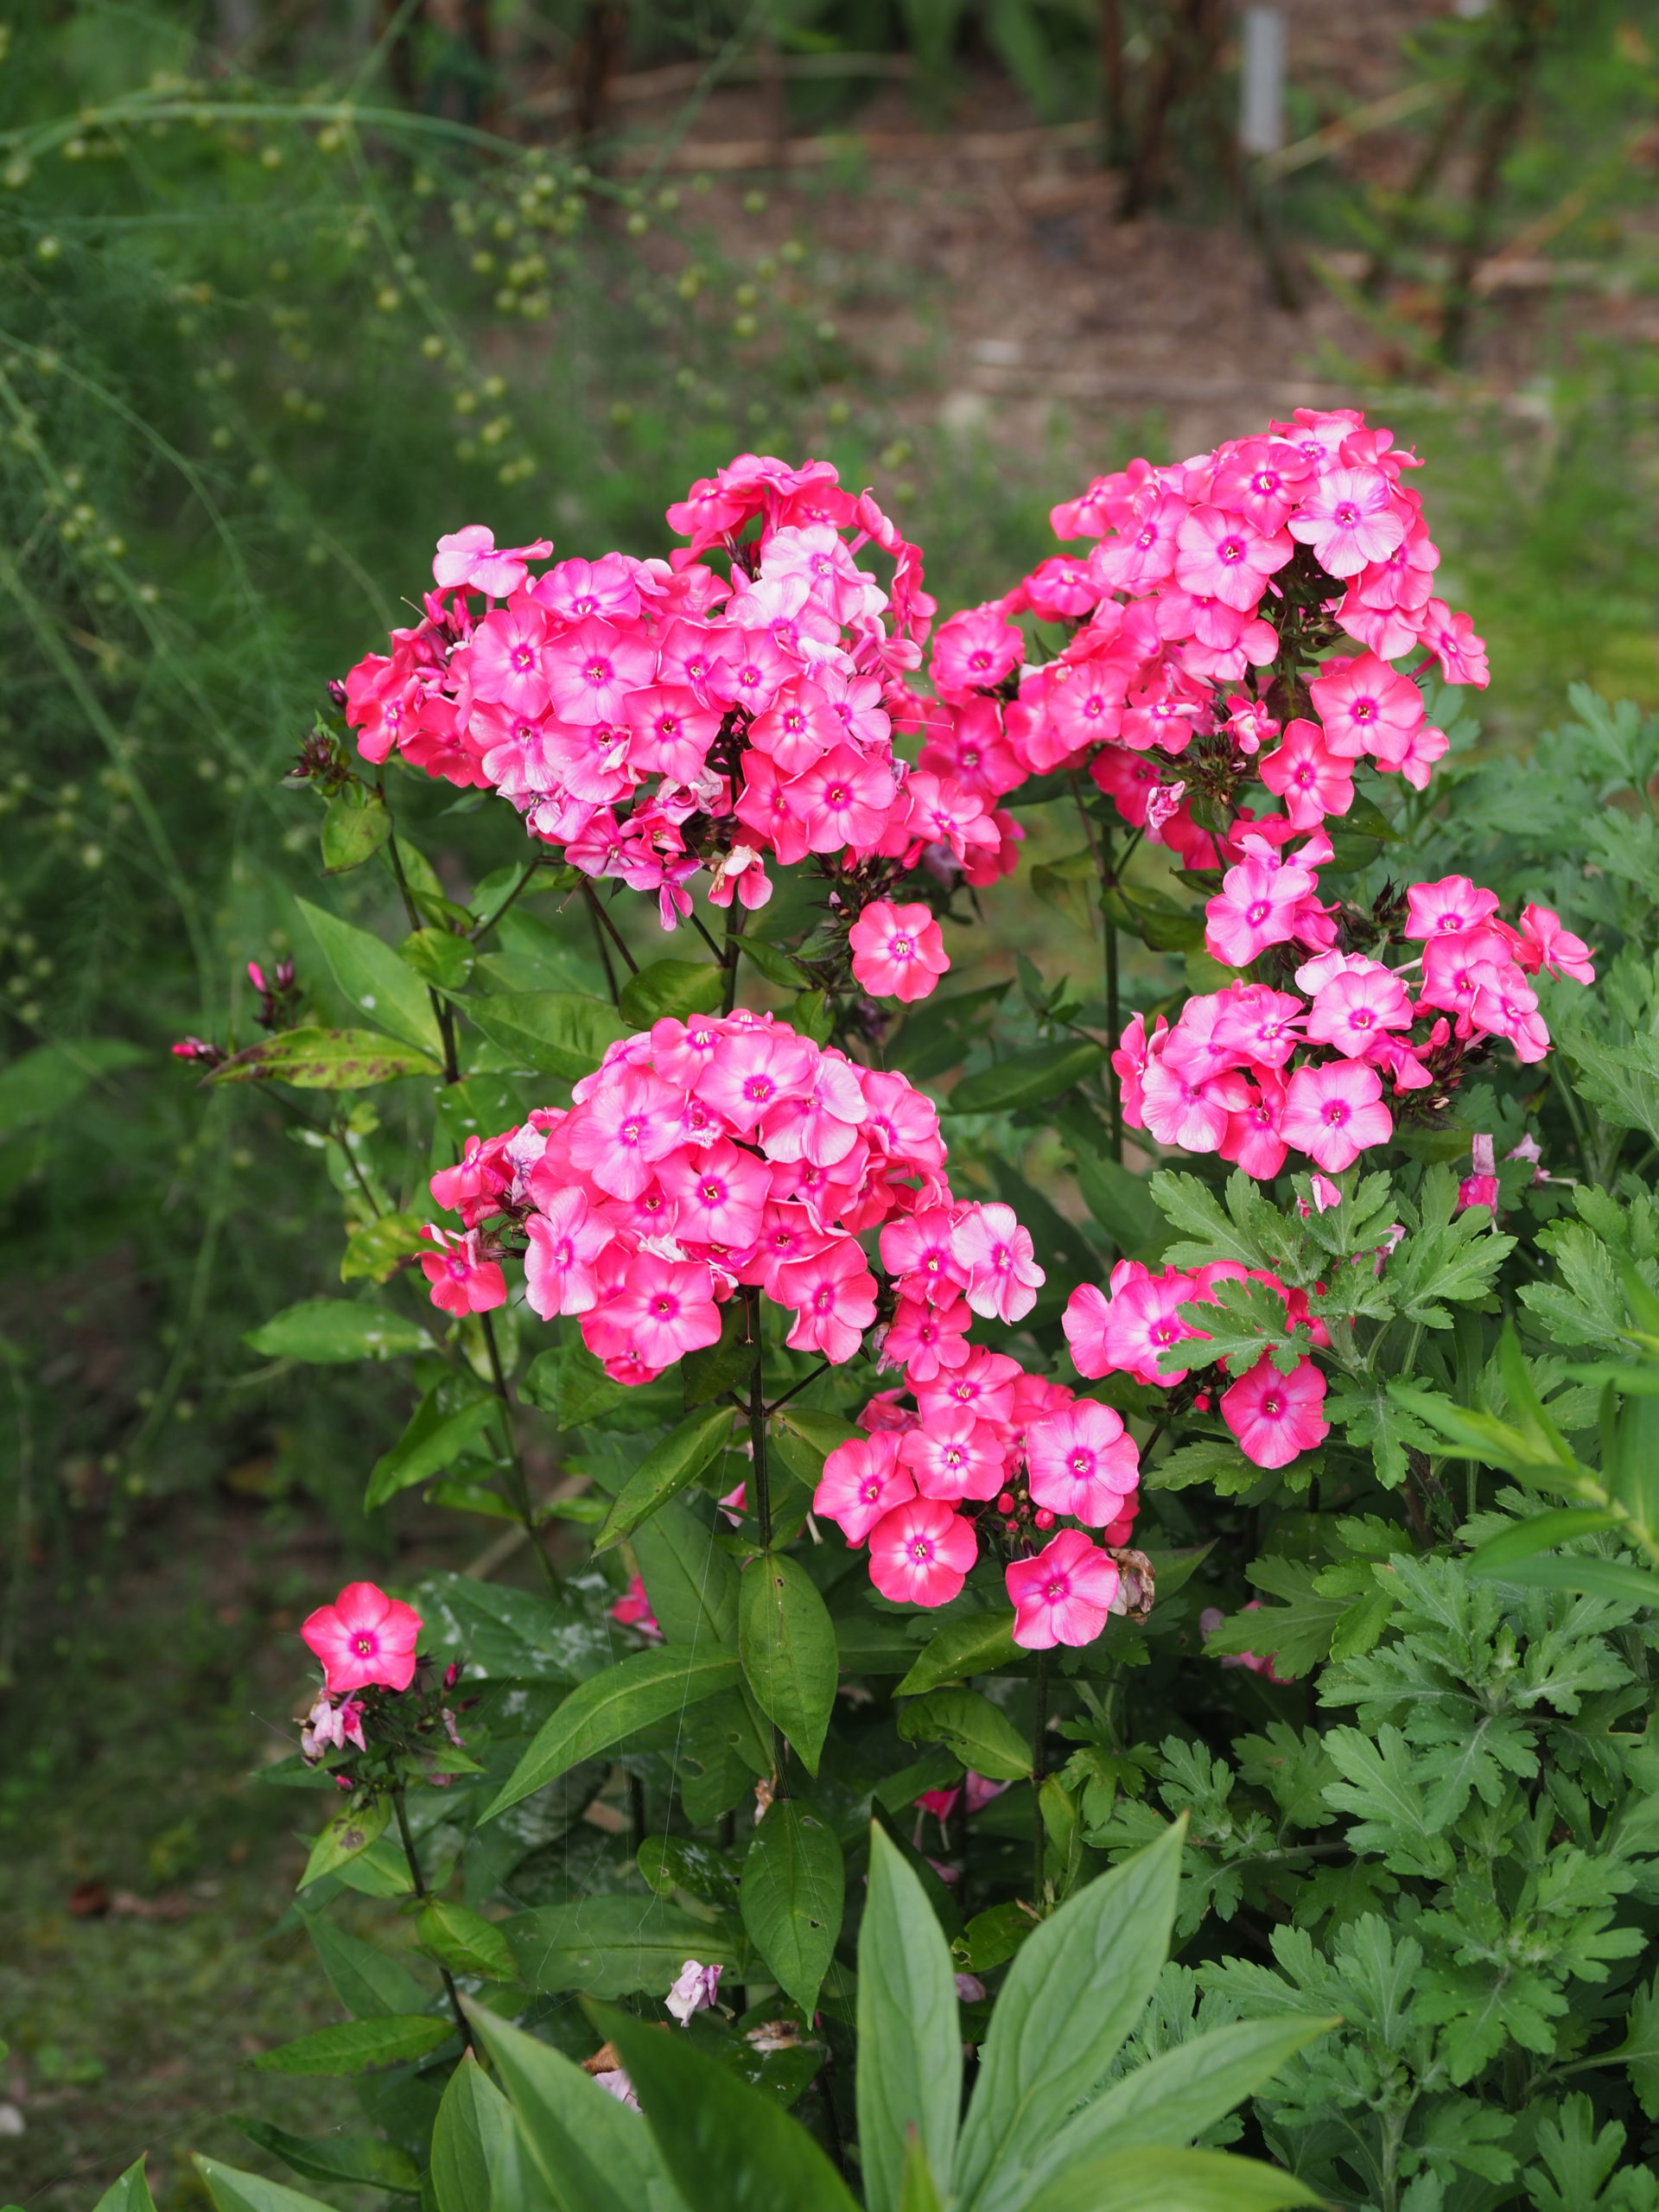 Phlox paniculata flower in August and into September. Colors range from pinks to reds, white, near blue. They are lightly scented so they won’t upset the nose, and the stems can be from 15 inches to nearly 2 feet, offering height to arrangements. Pick both newly opened and fully opened flower stems to extend the vase life. Strip off most of the foliage.